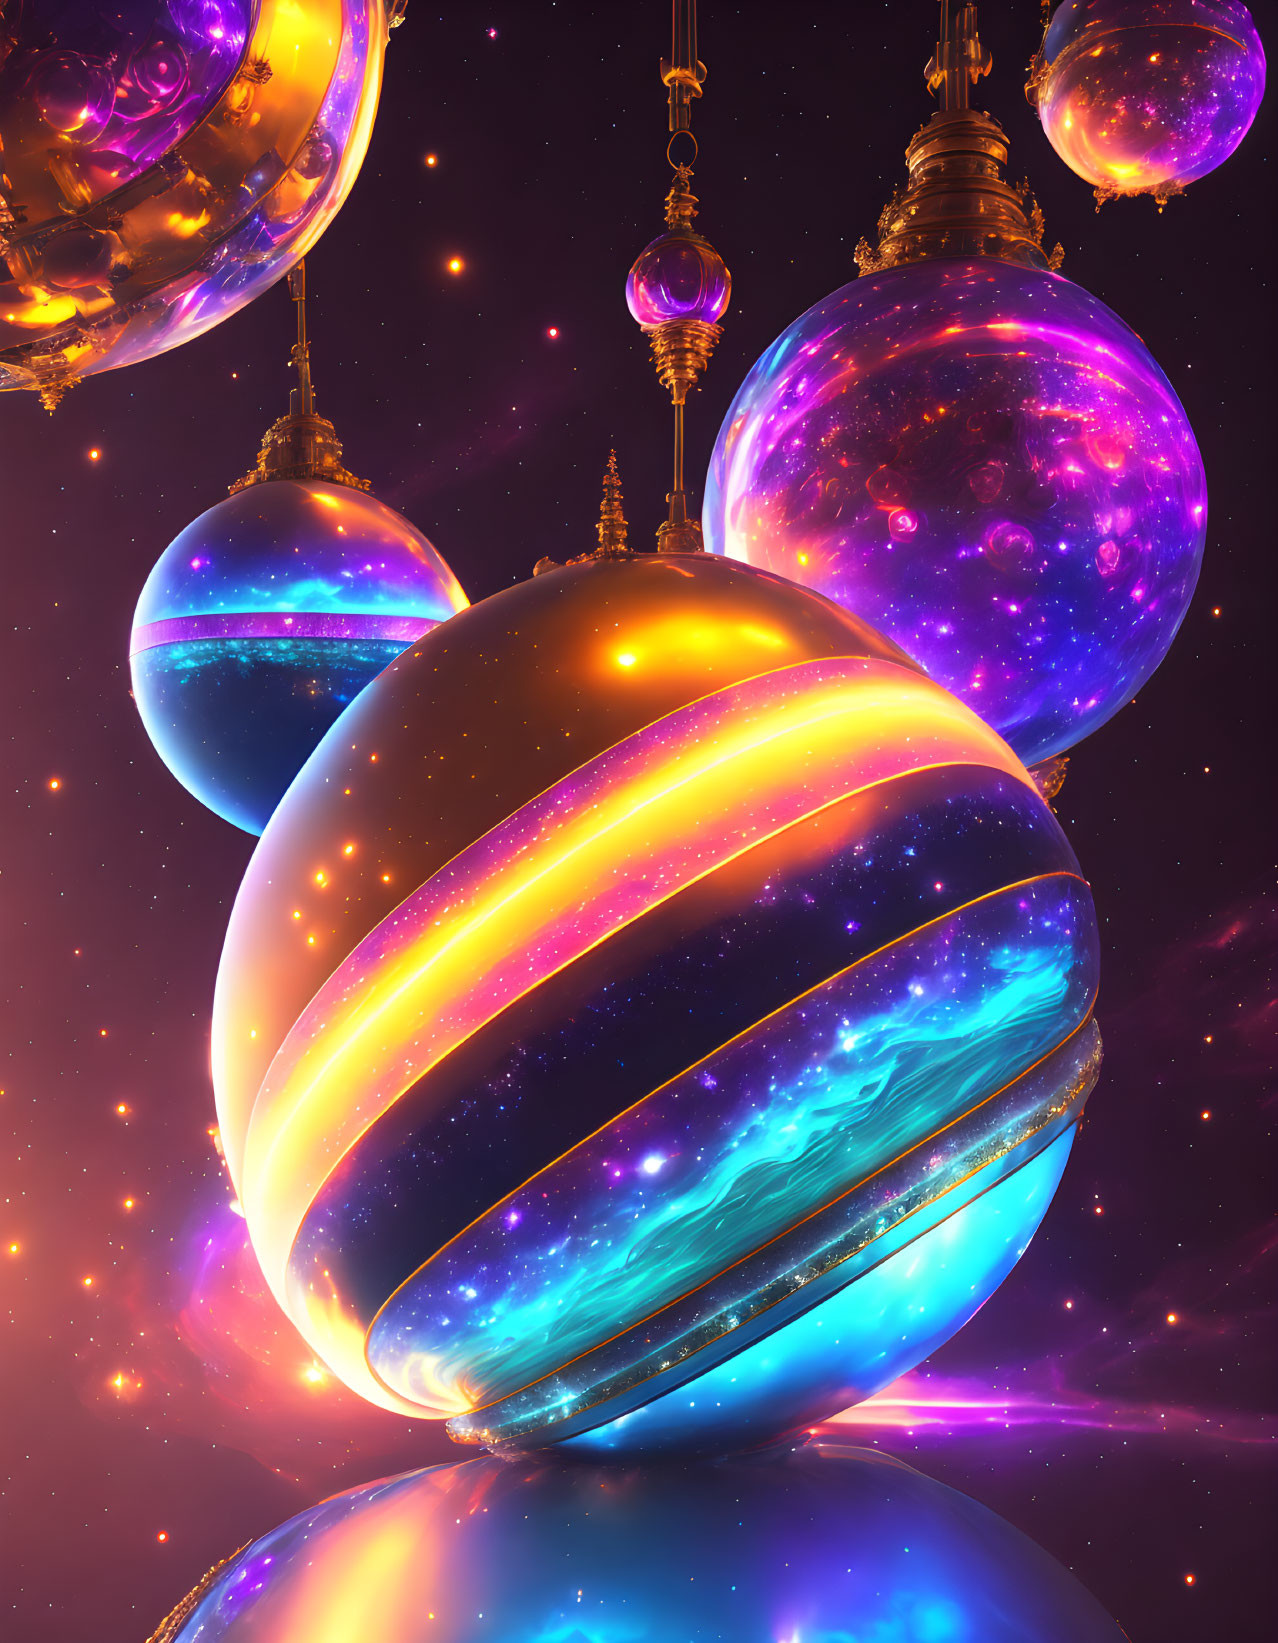 Celestial spheres digital art with glowing stripes and intricate ornaments